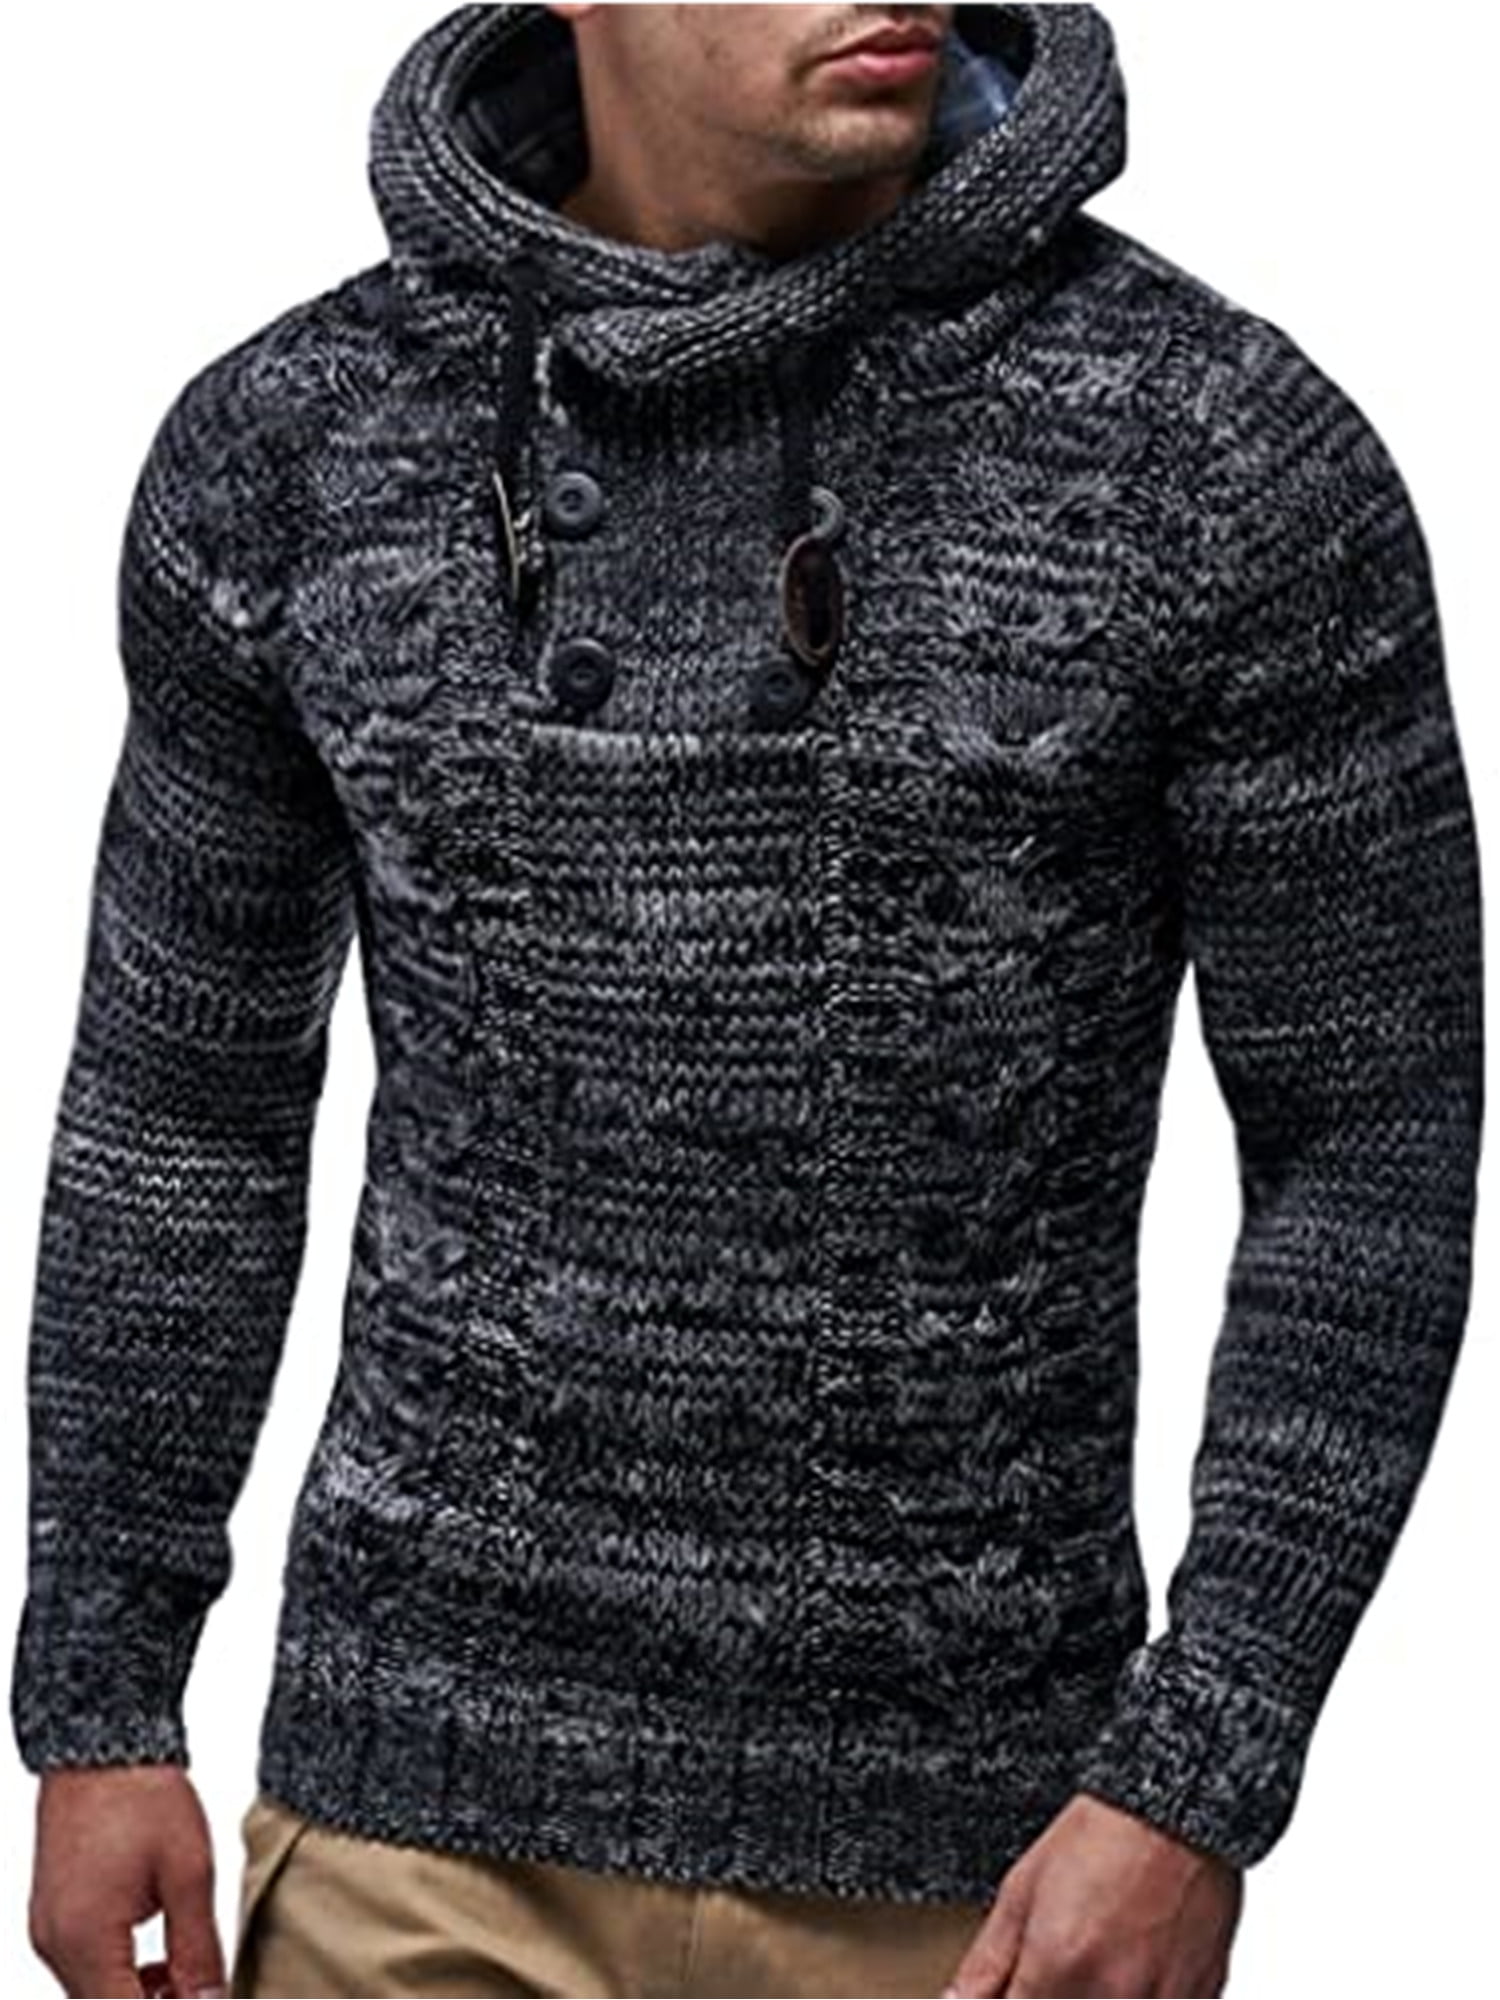 Casual Lightweight Slim Fit Hoodie for Men Outdoor Thermal Knit Sweater ...